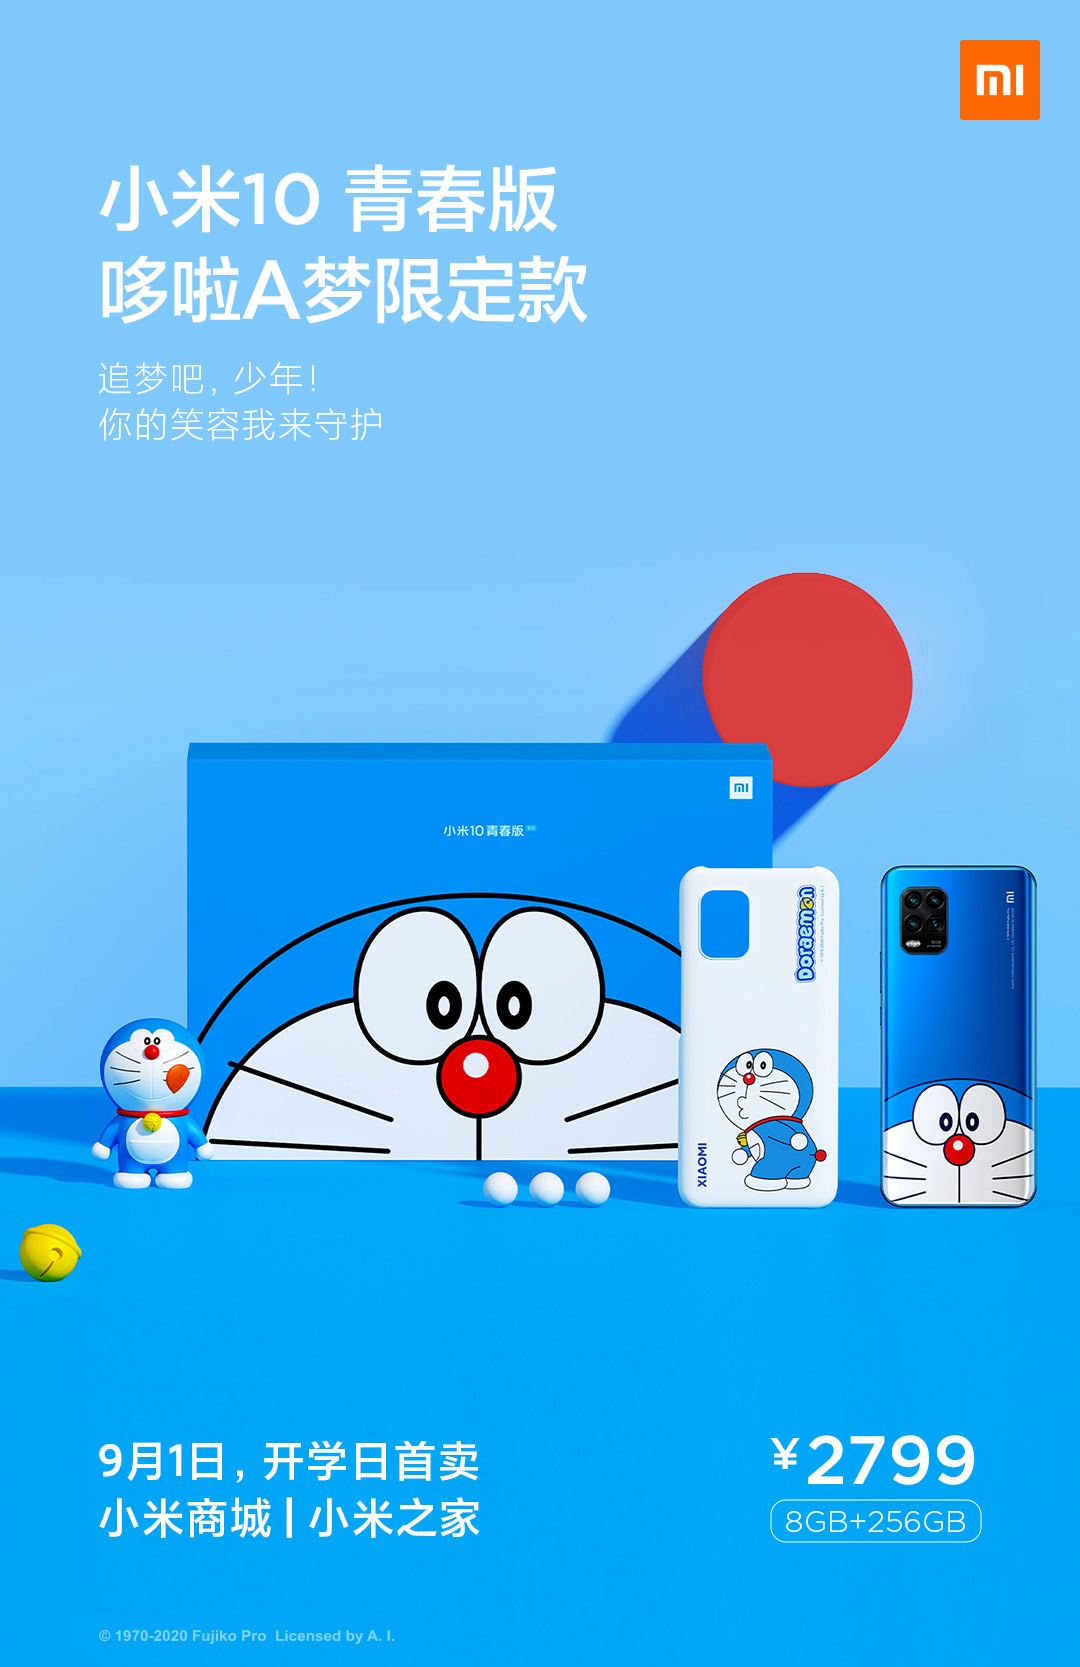 Xiaomi launches new Doraemon-themed Mi 10 Youth 5G smartphone for Â¥2799